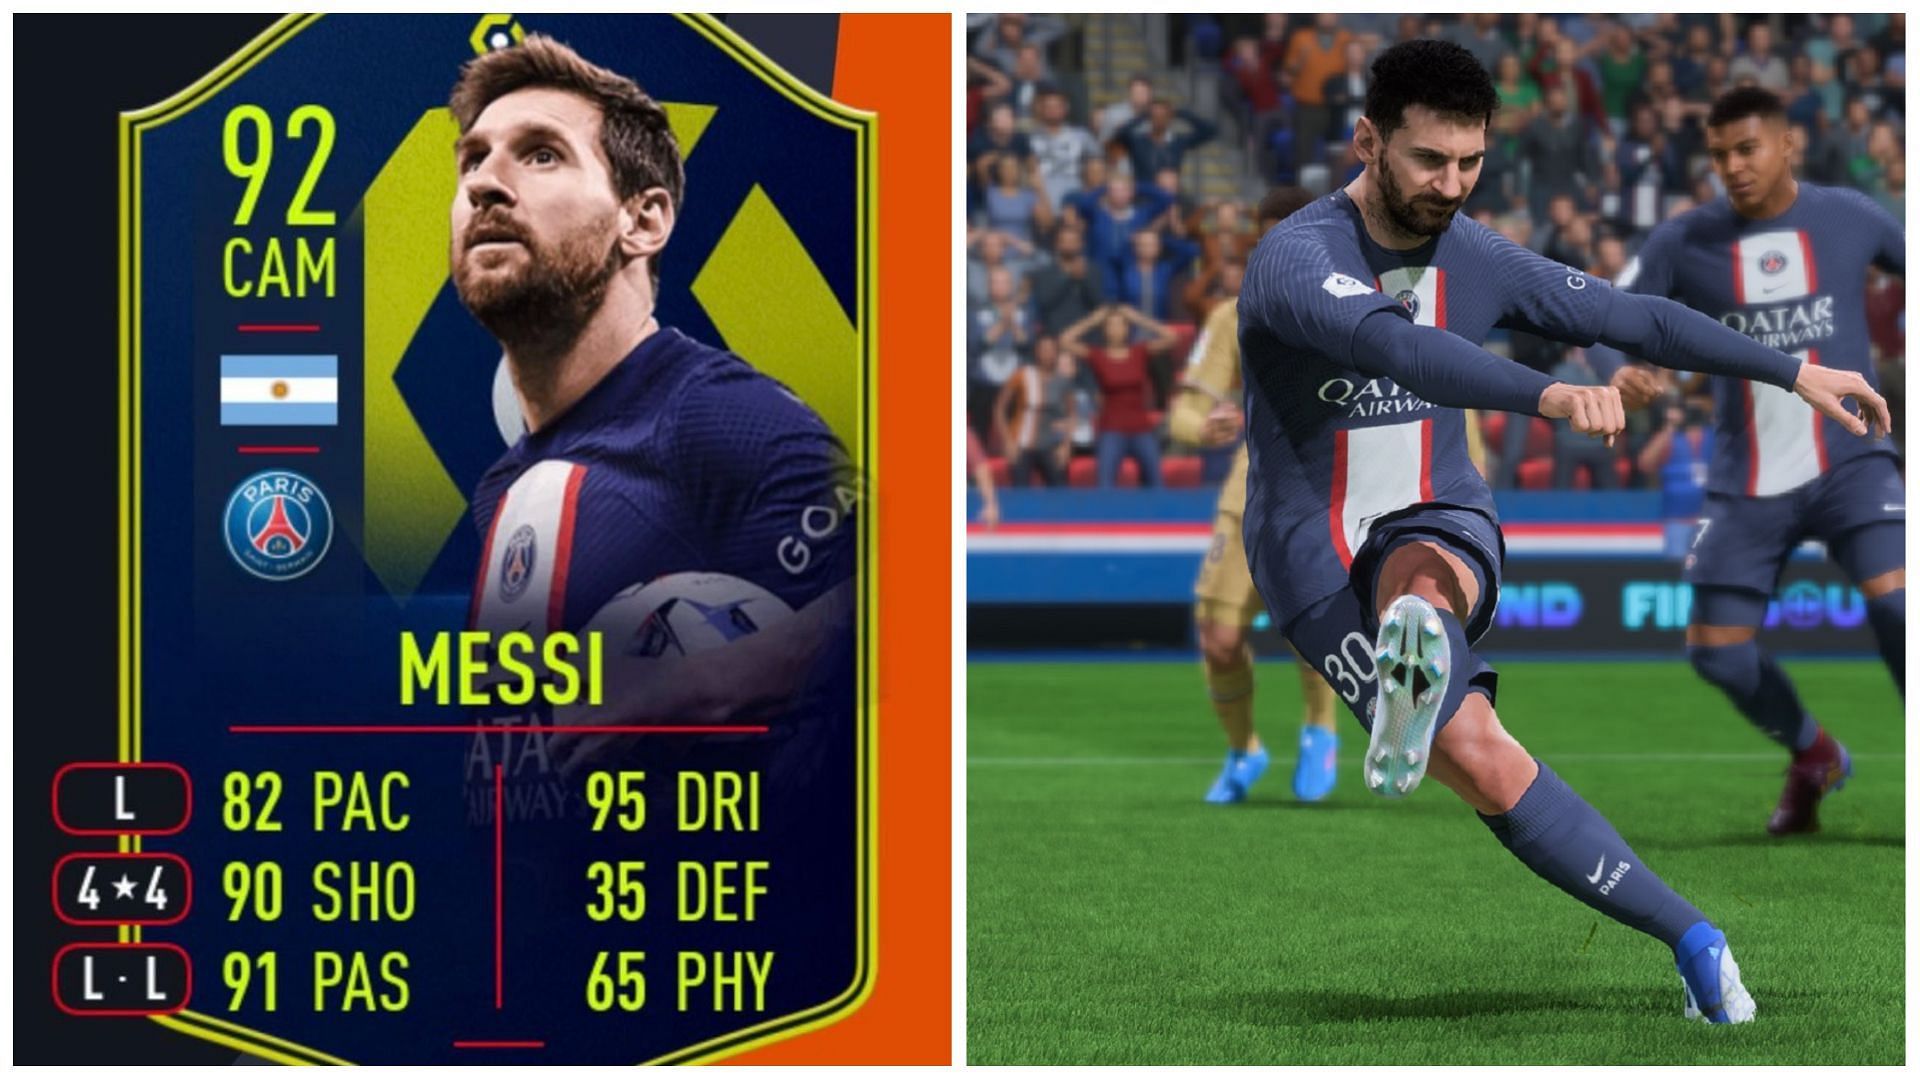 Get Lionel Messi for your FUT squad: How to claim FIFA 23